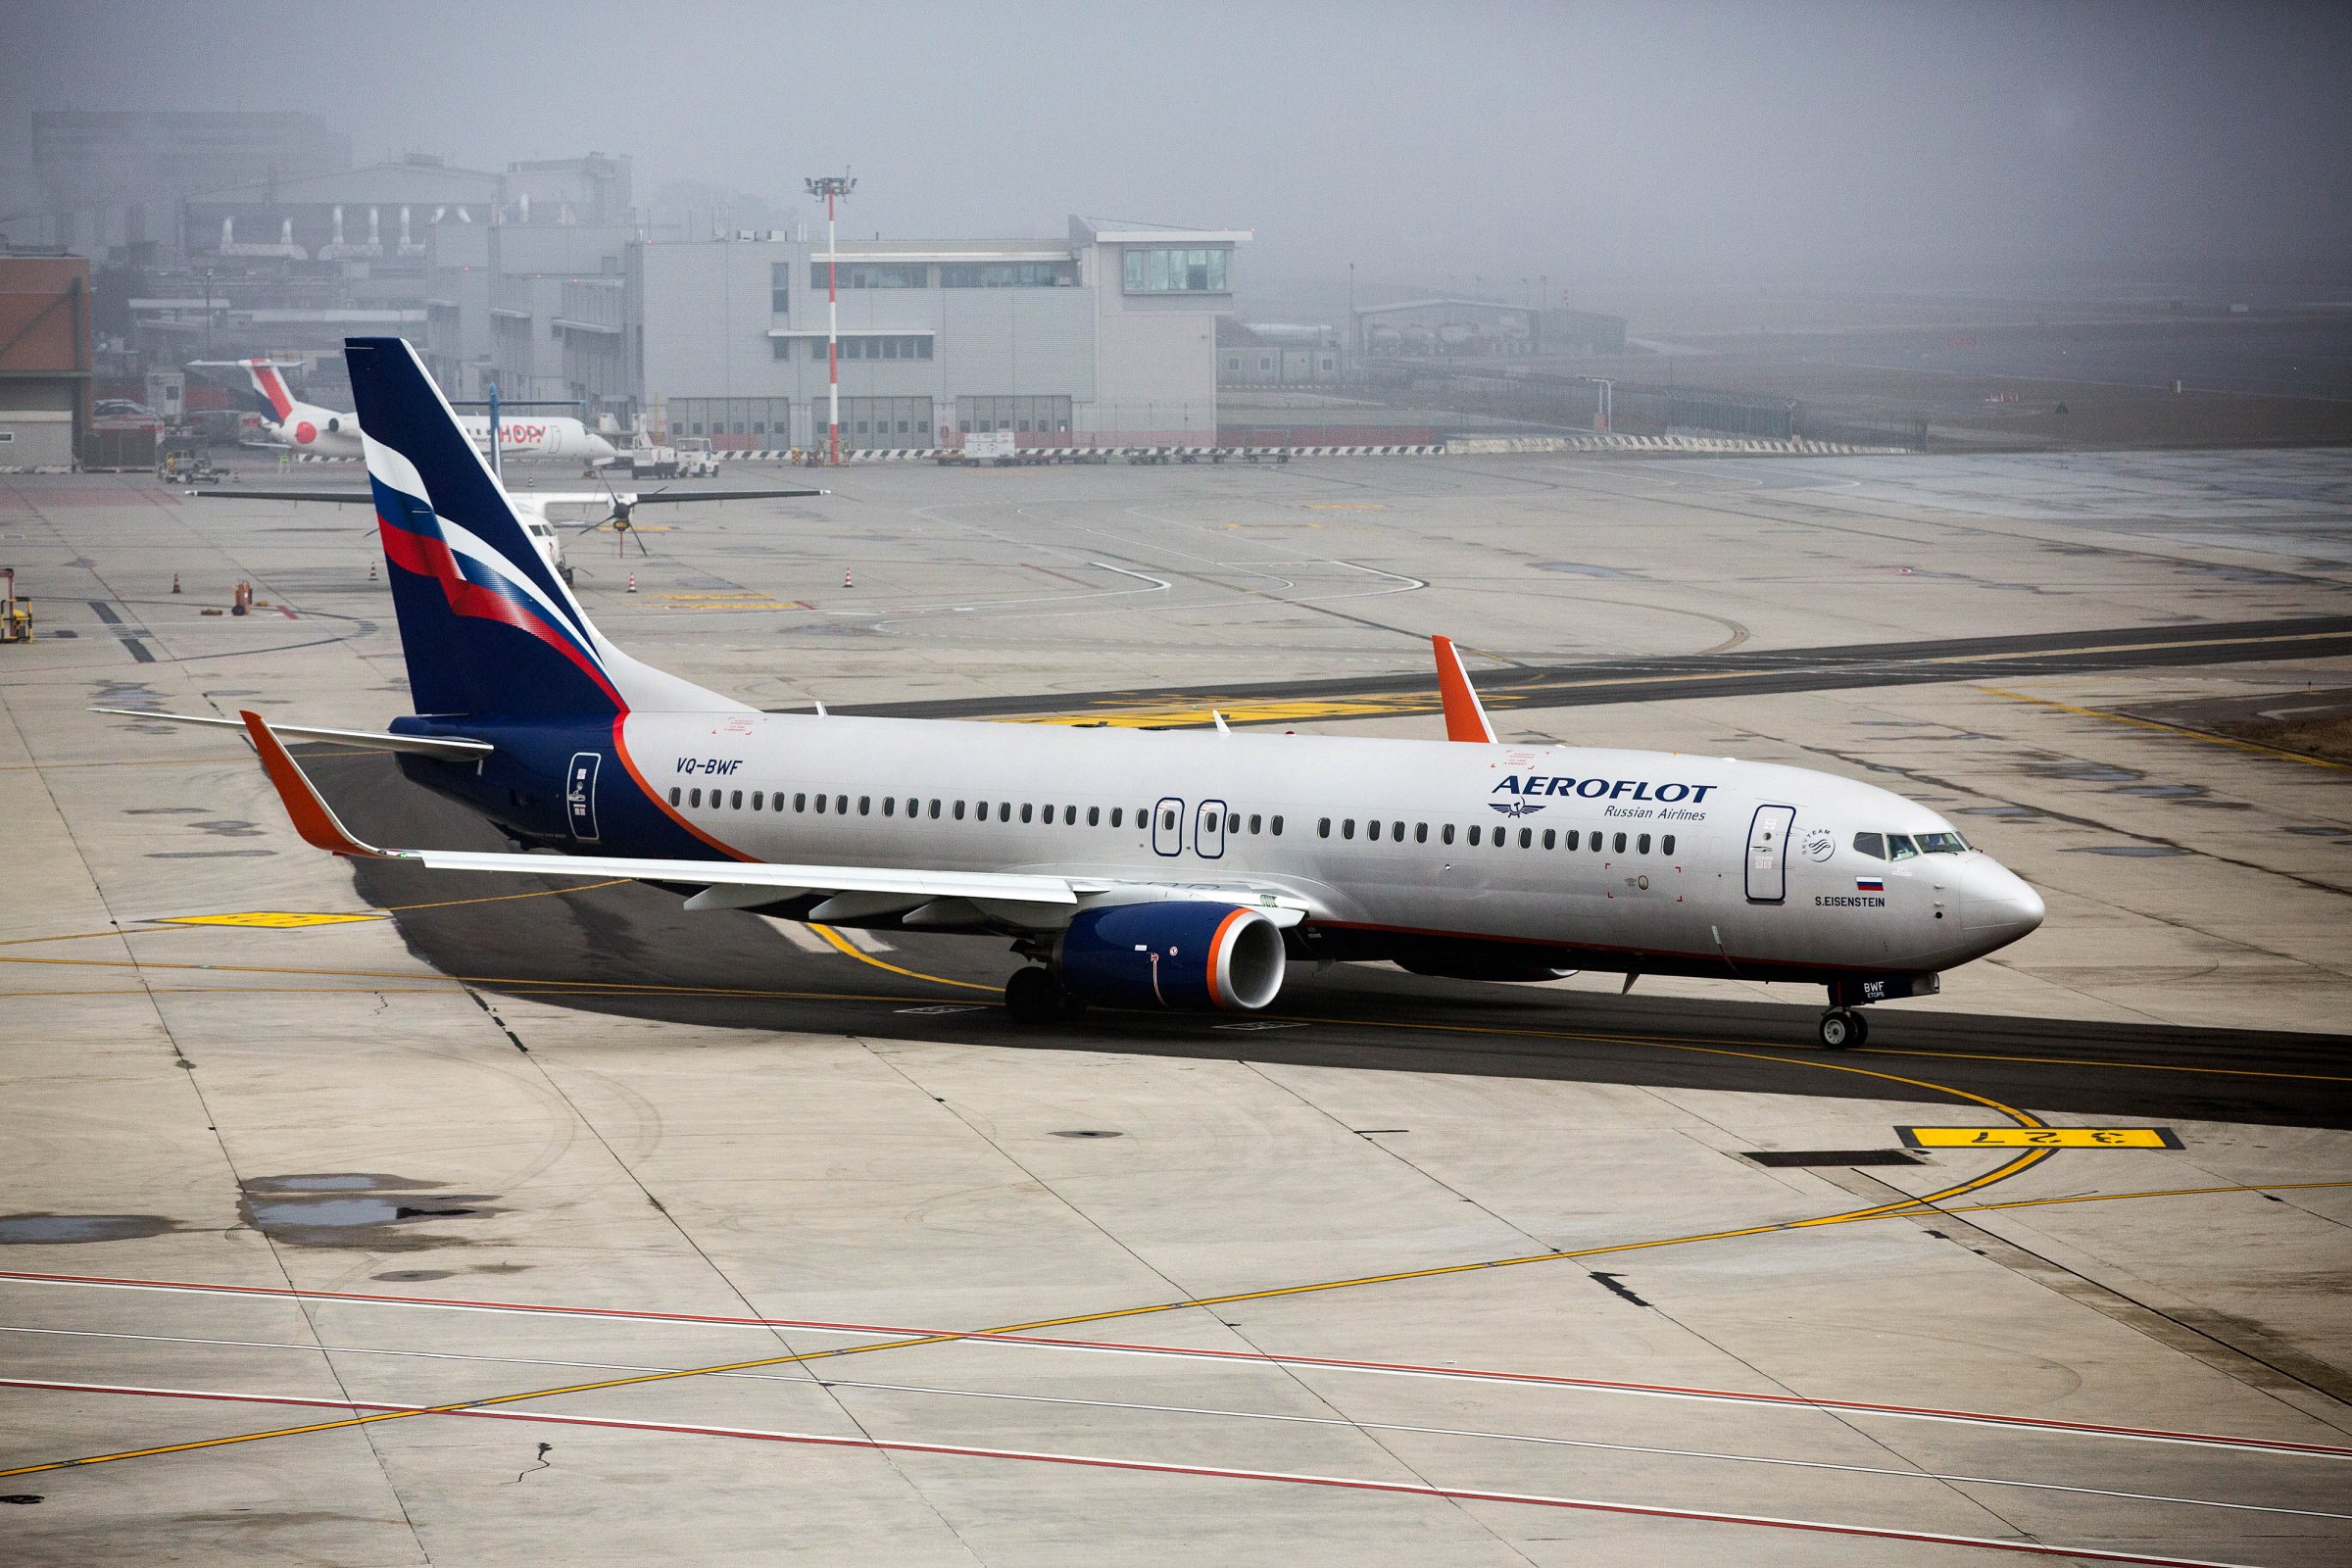 A Boeing Co 787 passenger aircraft, operated by Aeroflot - Russian Airlines PJSC, taxis on the tarmac at Venice Marco Polo Airport (VCE) in Venice, Italy, on Monday, Feb. 1, 2016.